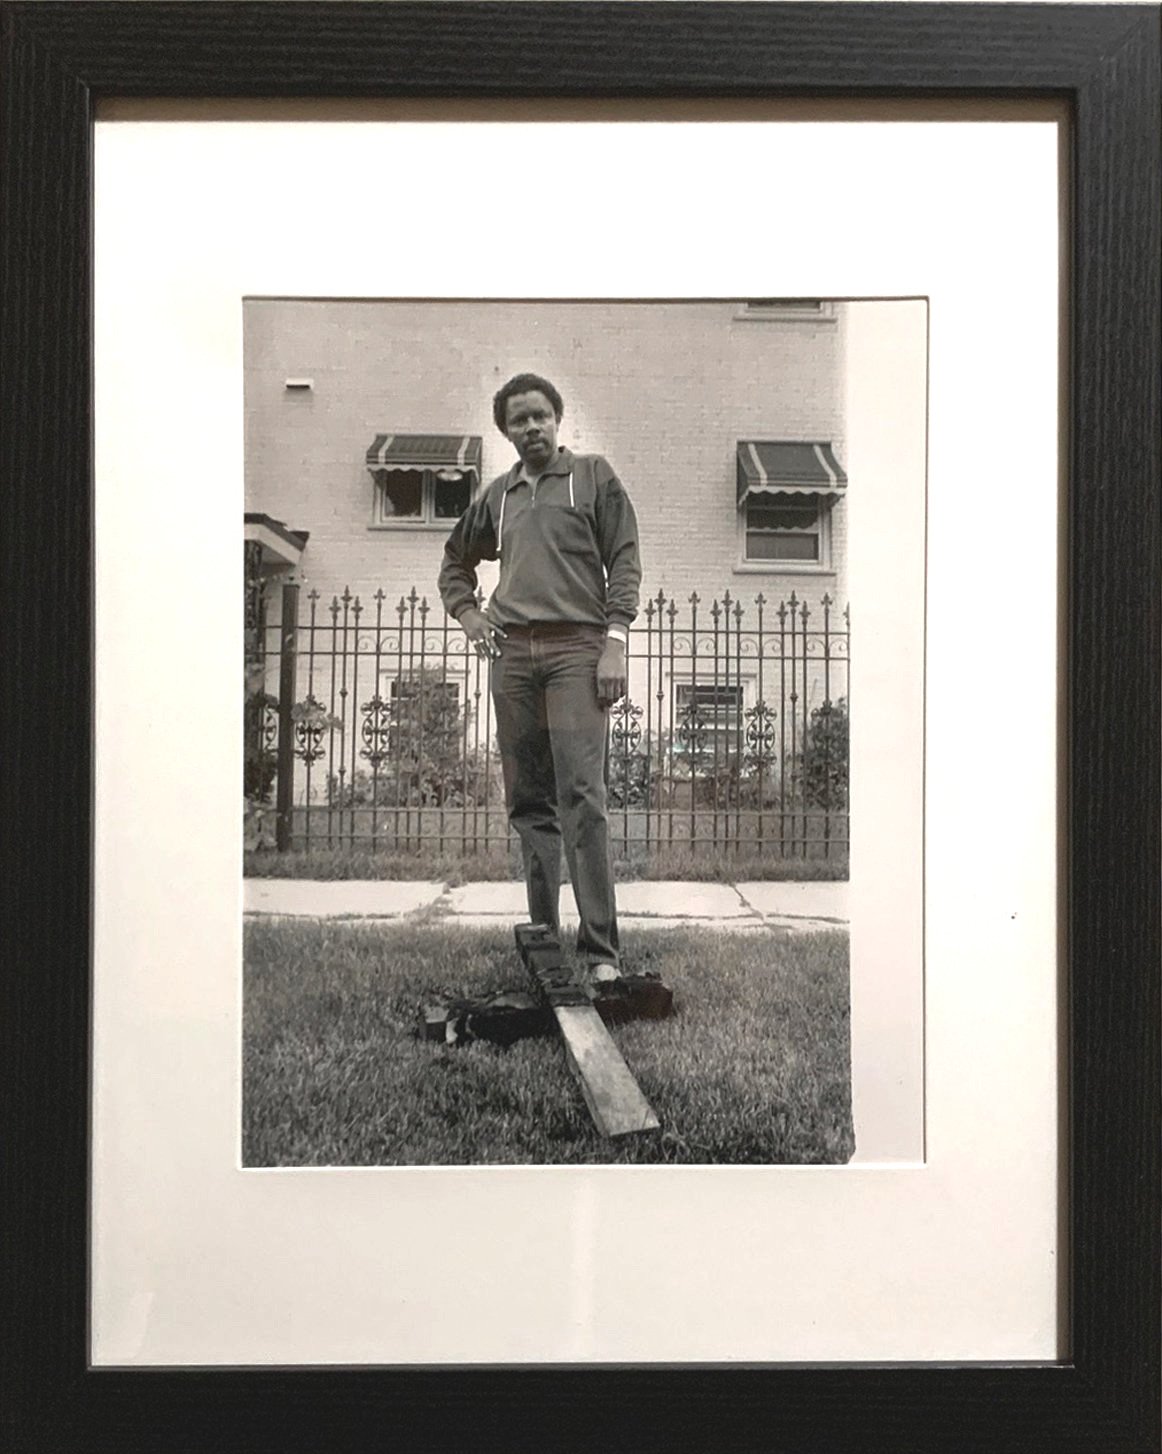 6. 6/29/88 – Joseph Henley, owner of two flat, with charred remains of cross burned on side yard of his home. Joe has been victim of many vandalism attacks since moving into predominately white neighb